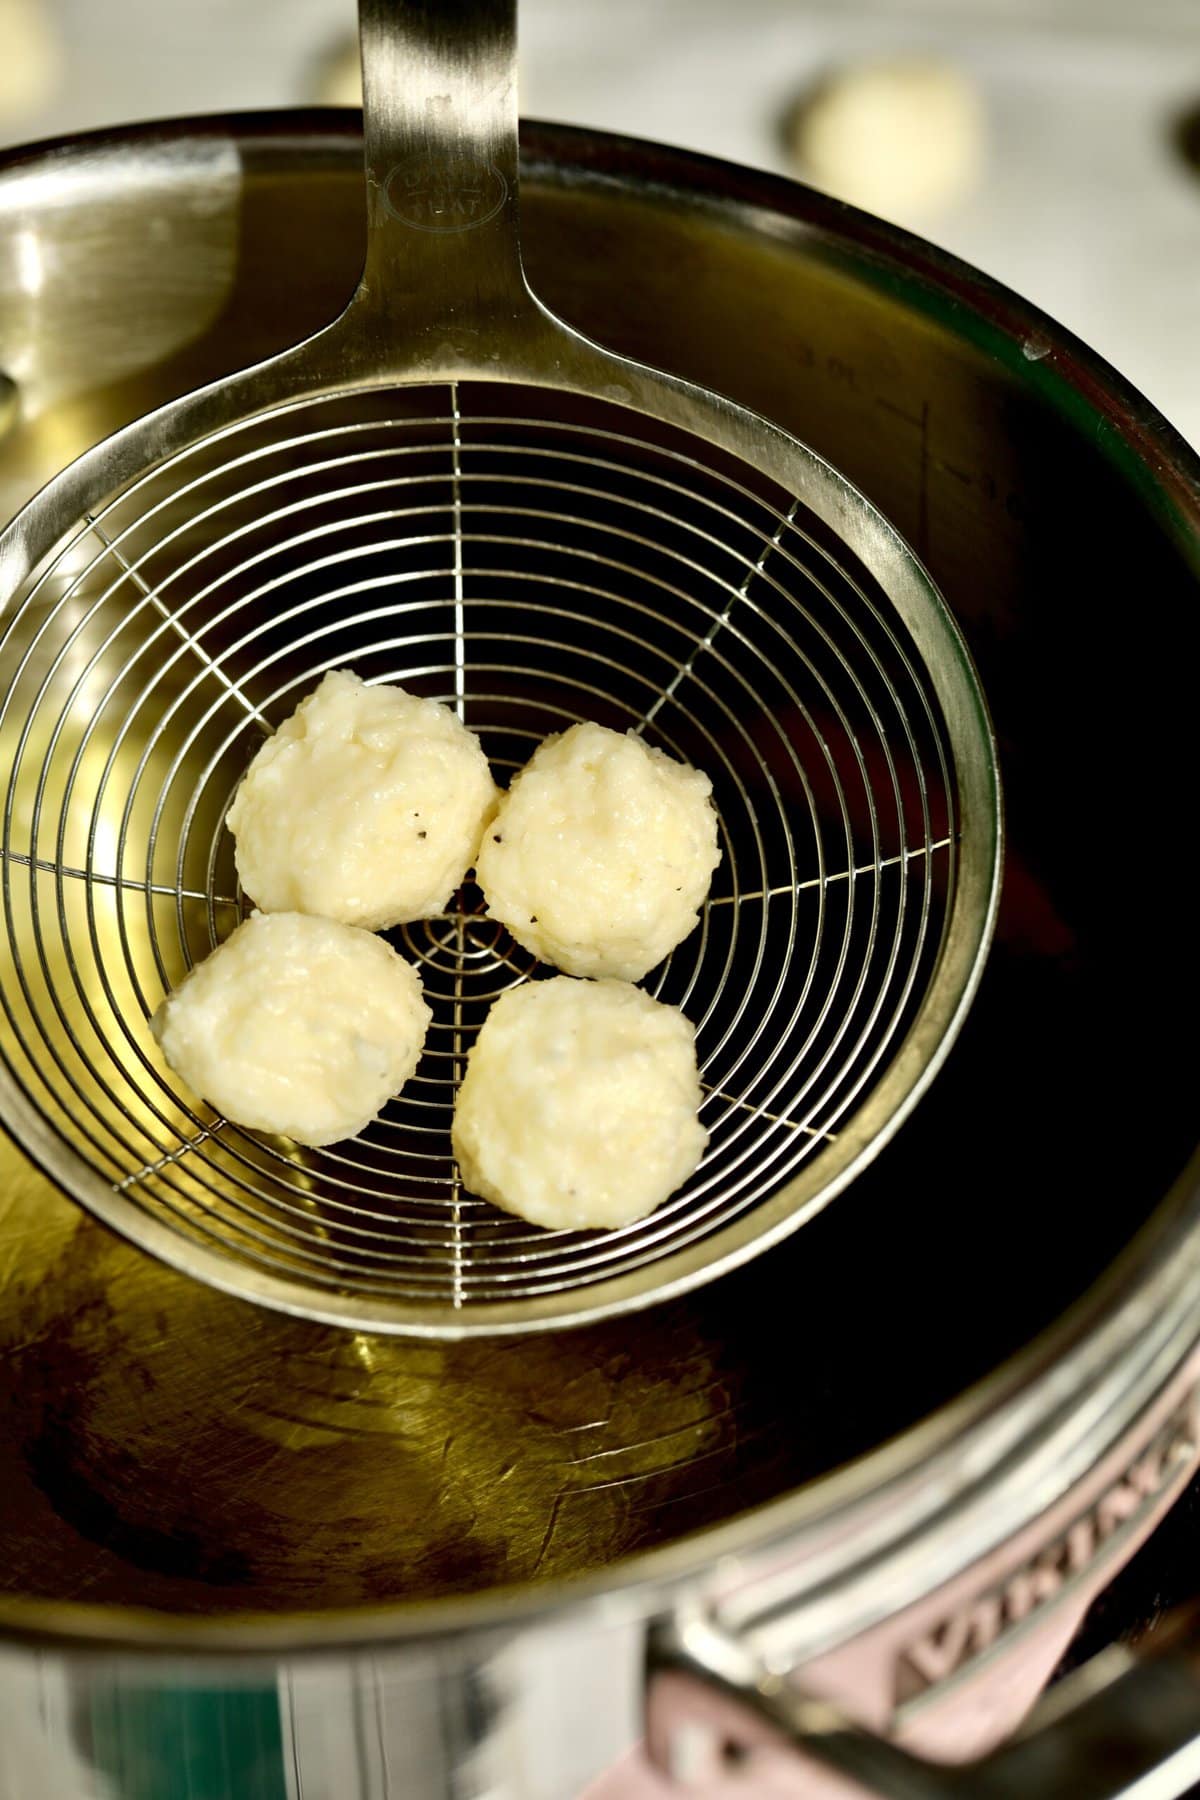 Process for making fried cheese balls- placing cheese balls in hot oil a few at a time.